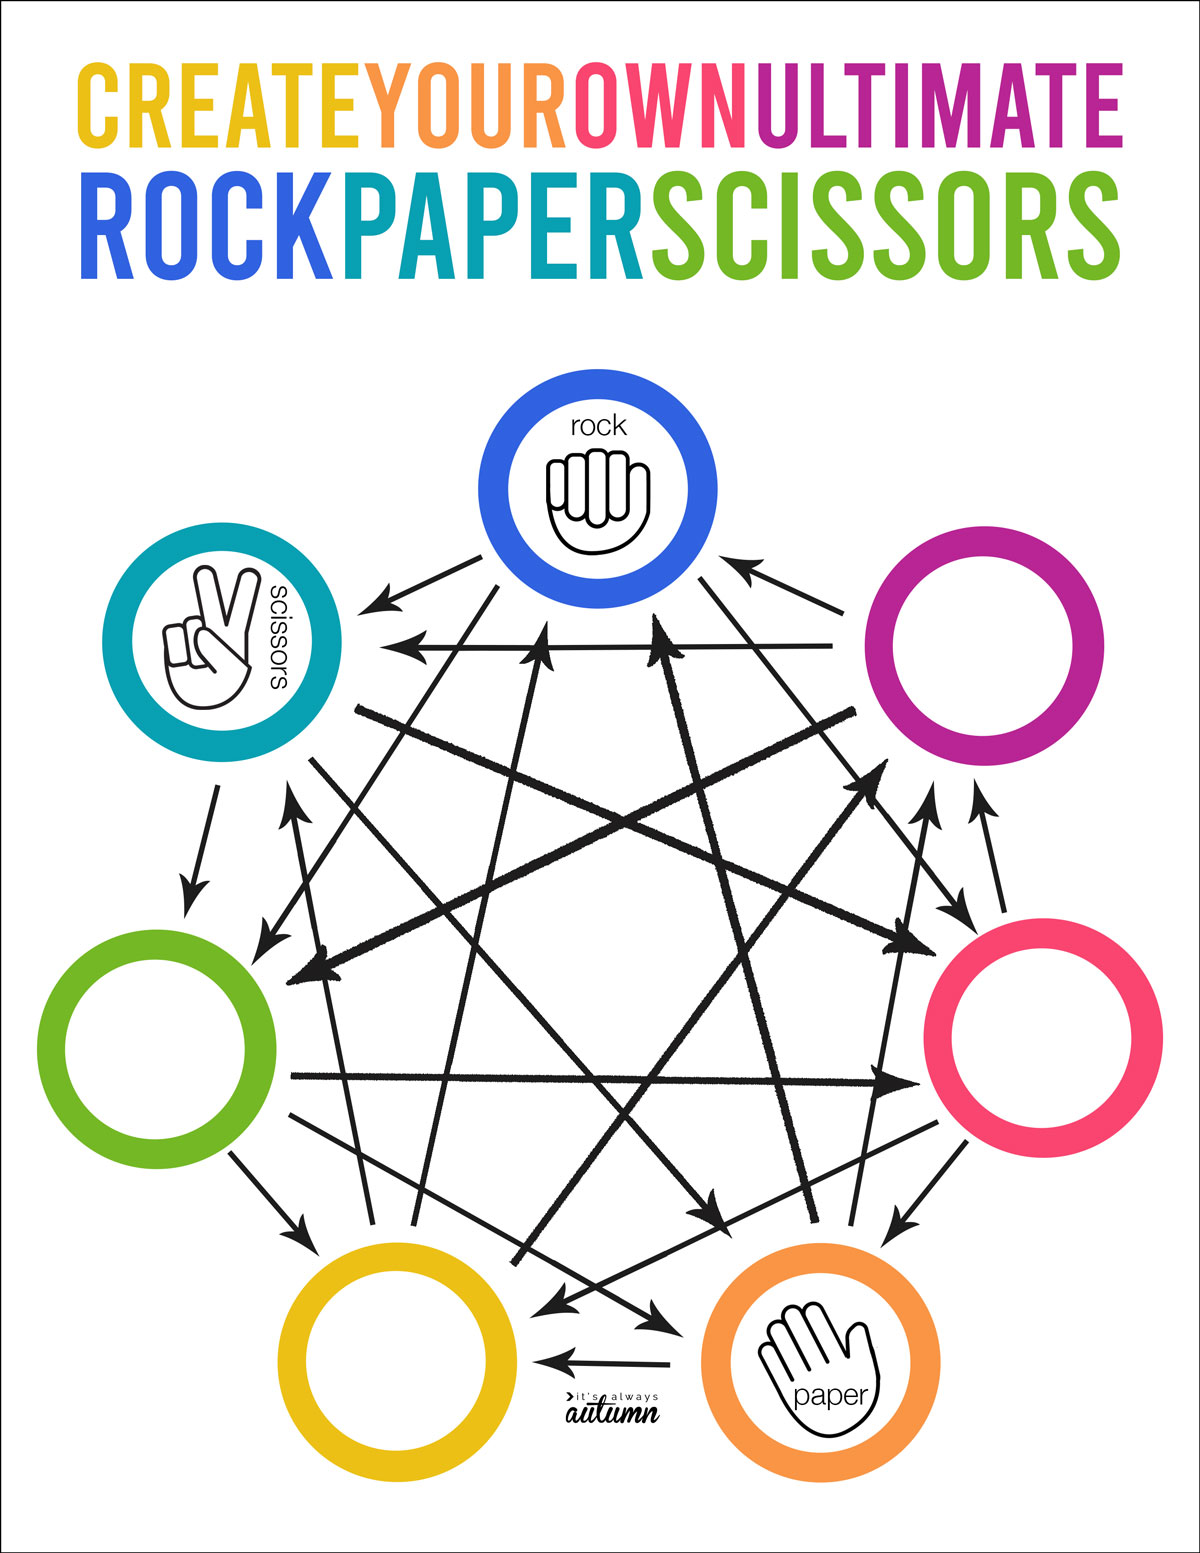 Create your own ULTIMATE rock paper scissors worksheet with 7 options